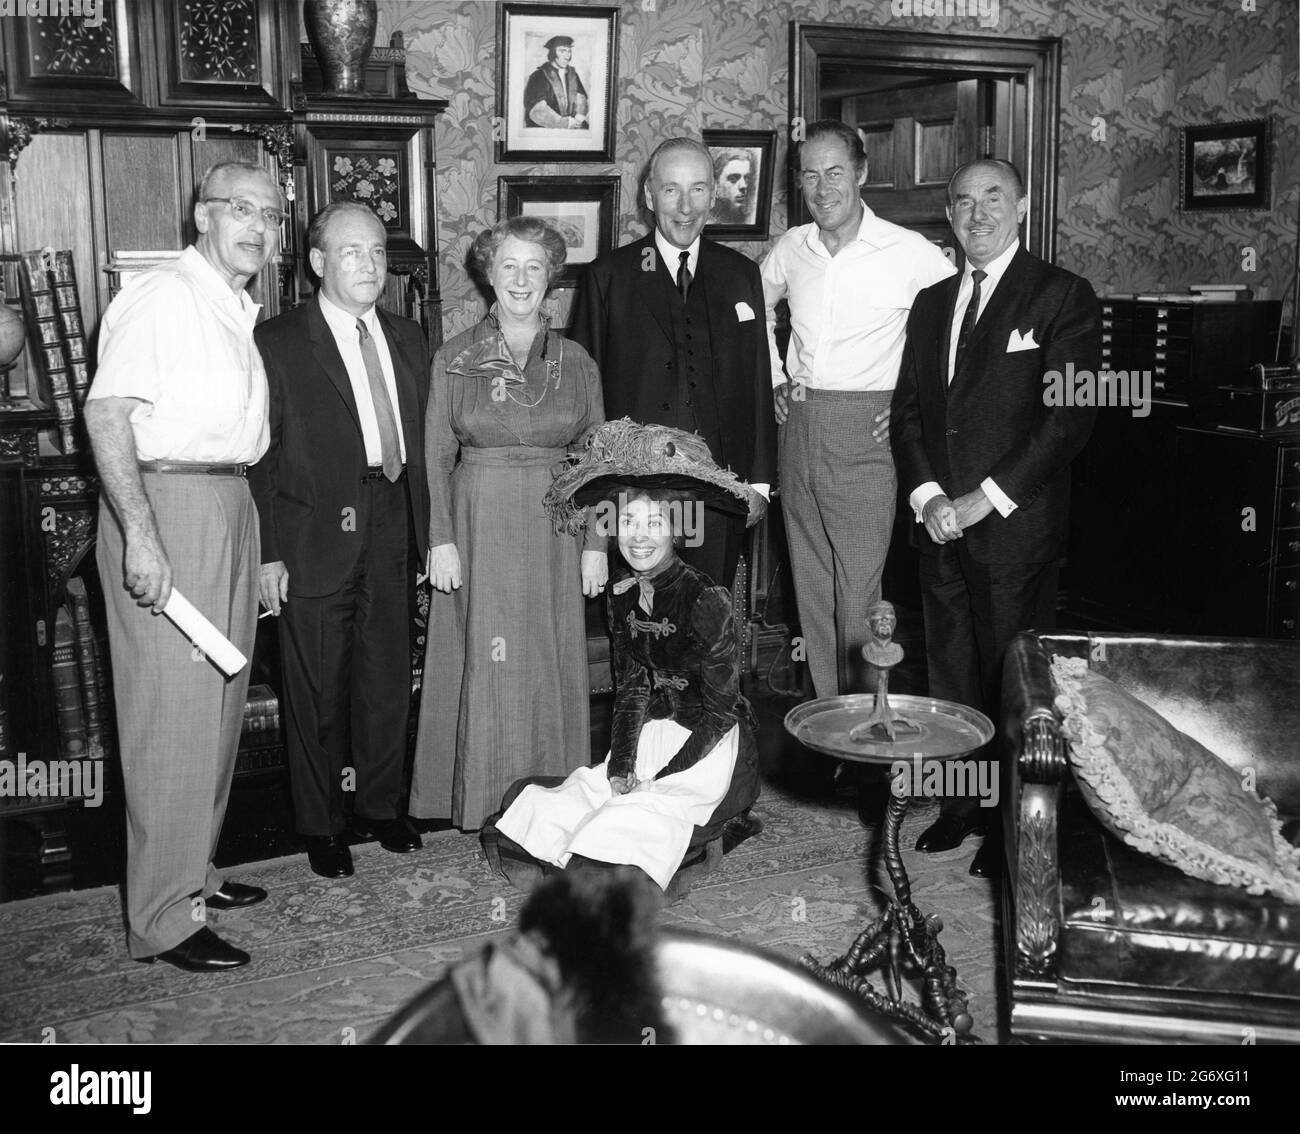 Director GEORGE CUKOR, Warners Vice President STEPHEN B. TRILLING, MONA WASHBOURNE, WILFRID HYDE-WHITE, REX HARRISON Warners President JACK L. WARNER and AUDREY HEPBURN on set candid group photo during filming of MY FAIR LADY 1964 director GEORGE CUKOR from the Broadway musical adapted from the play Pygmalion by George Bernard Shaw screenplay book and lyrics Alan Jay Lerner music Frederick Loewe production design and costumes Cecil Beaton producer Jack L. Warner Warner Bros. Stock Photo